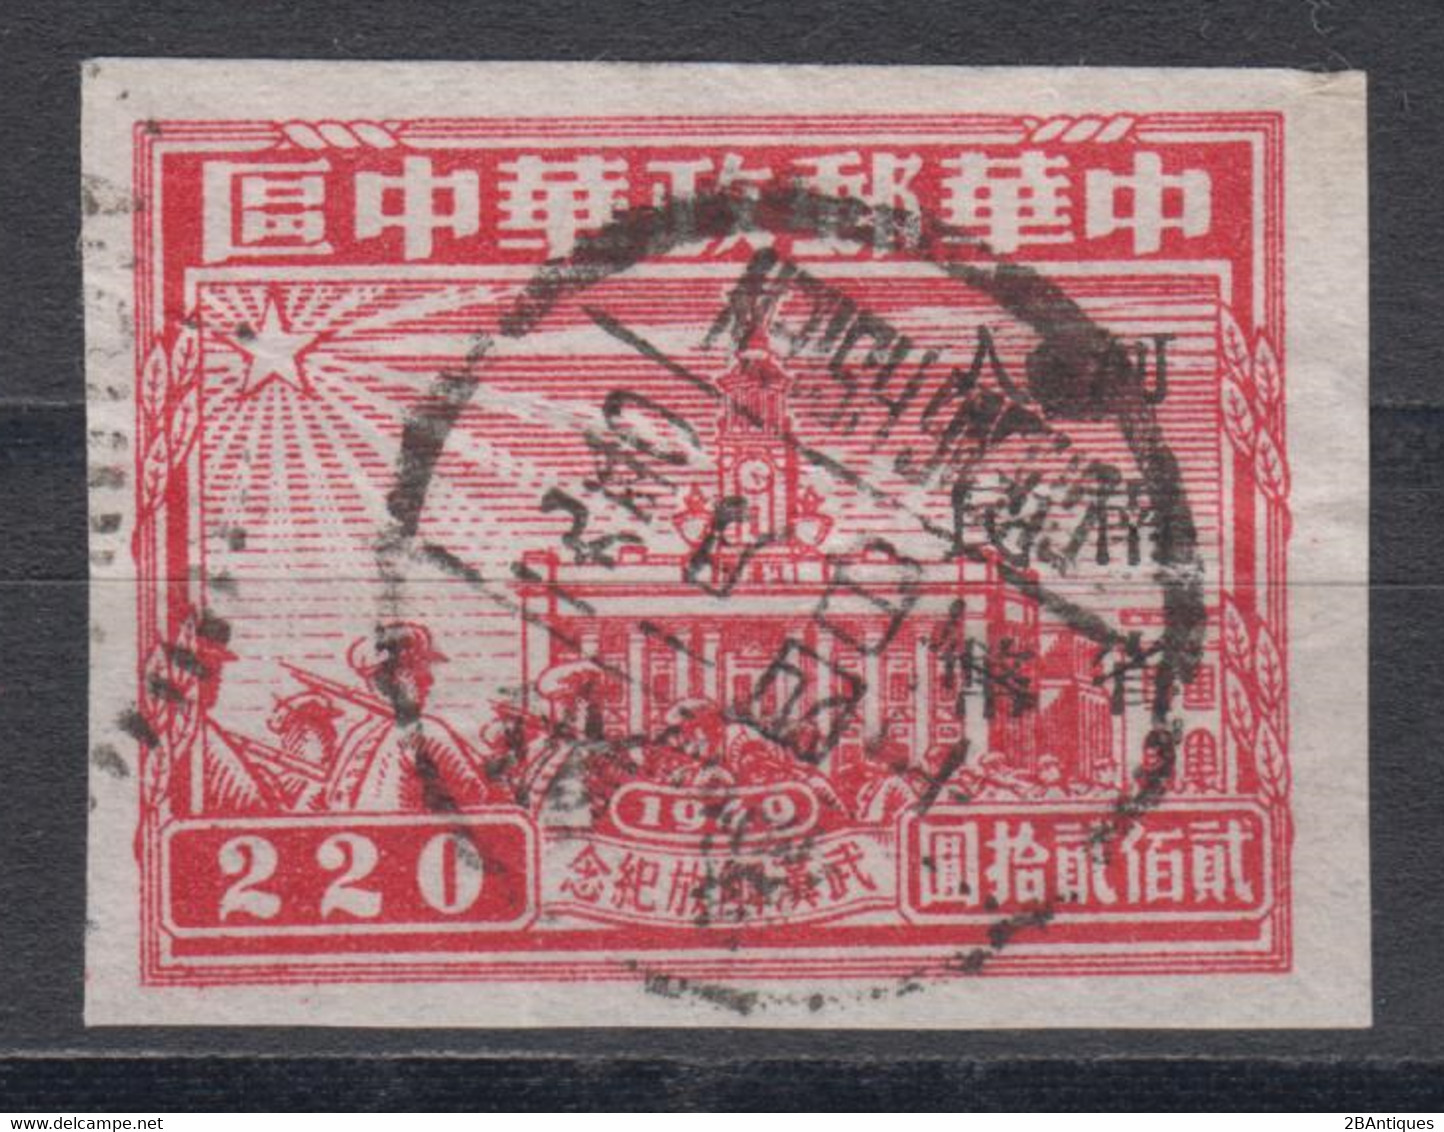 CENTRAL CHINA 1949 -  Liberation Of Hankau, Hanyang & Wuchang IMPERFORATE WITH OVERPRINT - China Central 1948-49